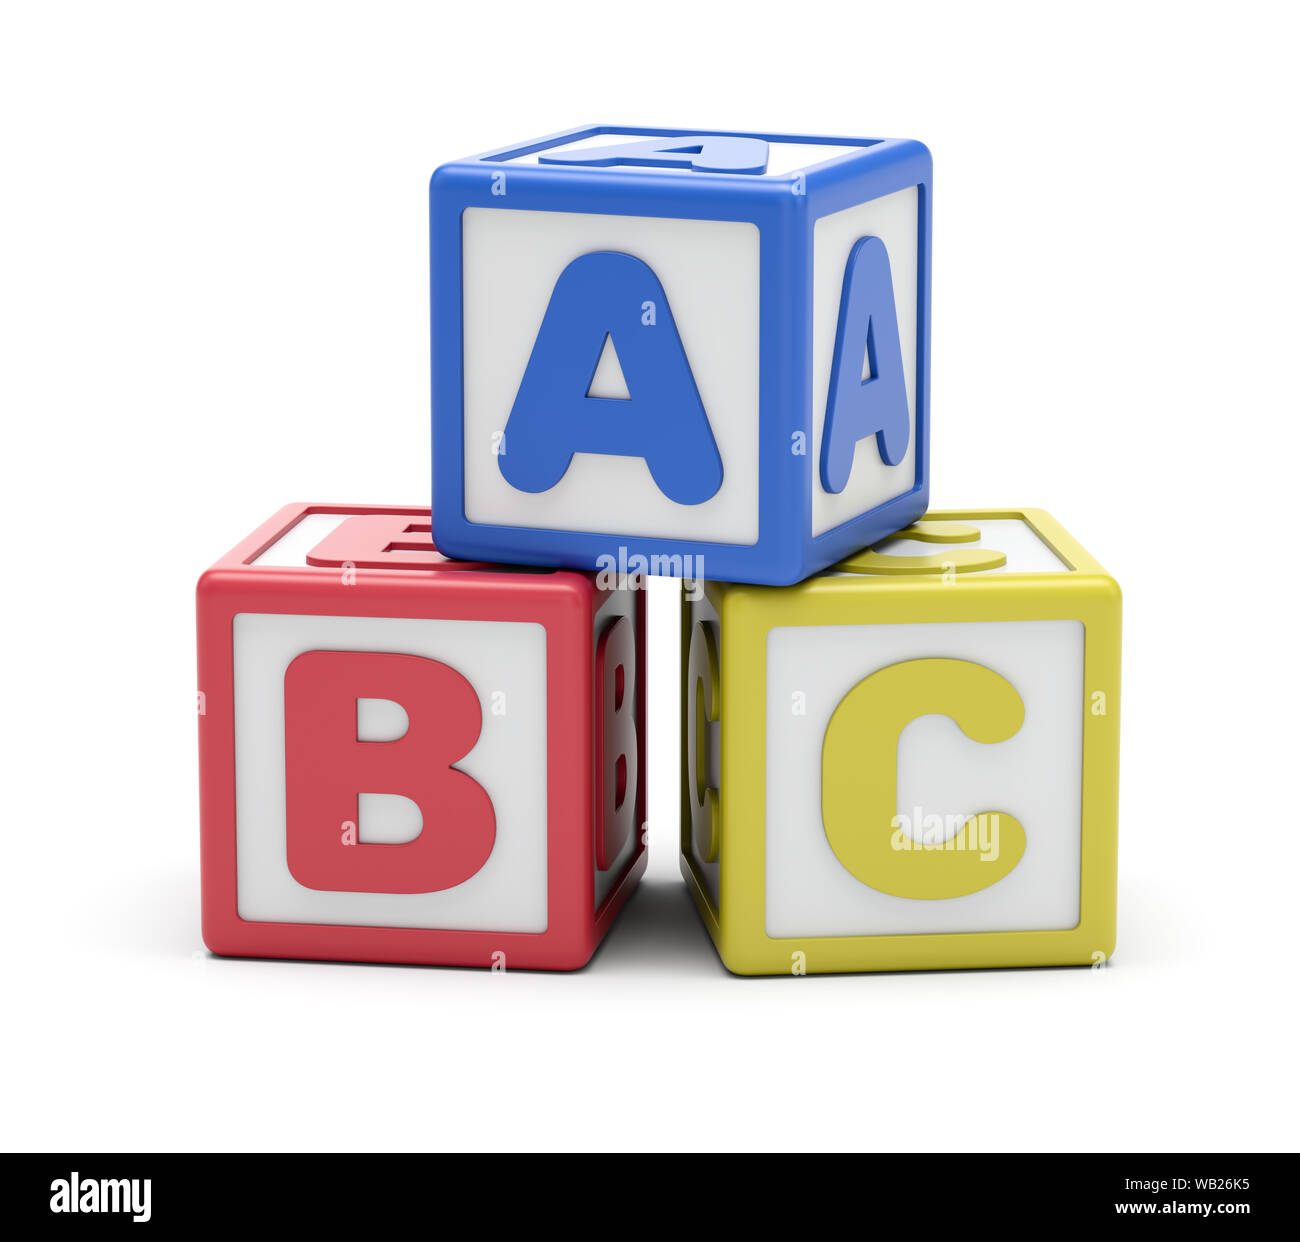 Blue, red, yellow ABC alphabet blocks composition. 3D rendering. Isolated on white background. Stock Photo